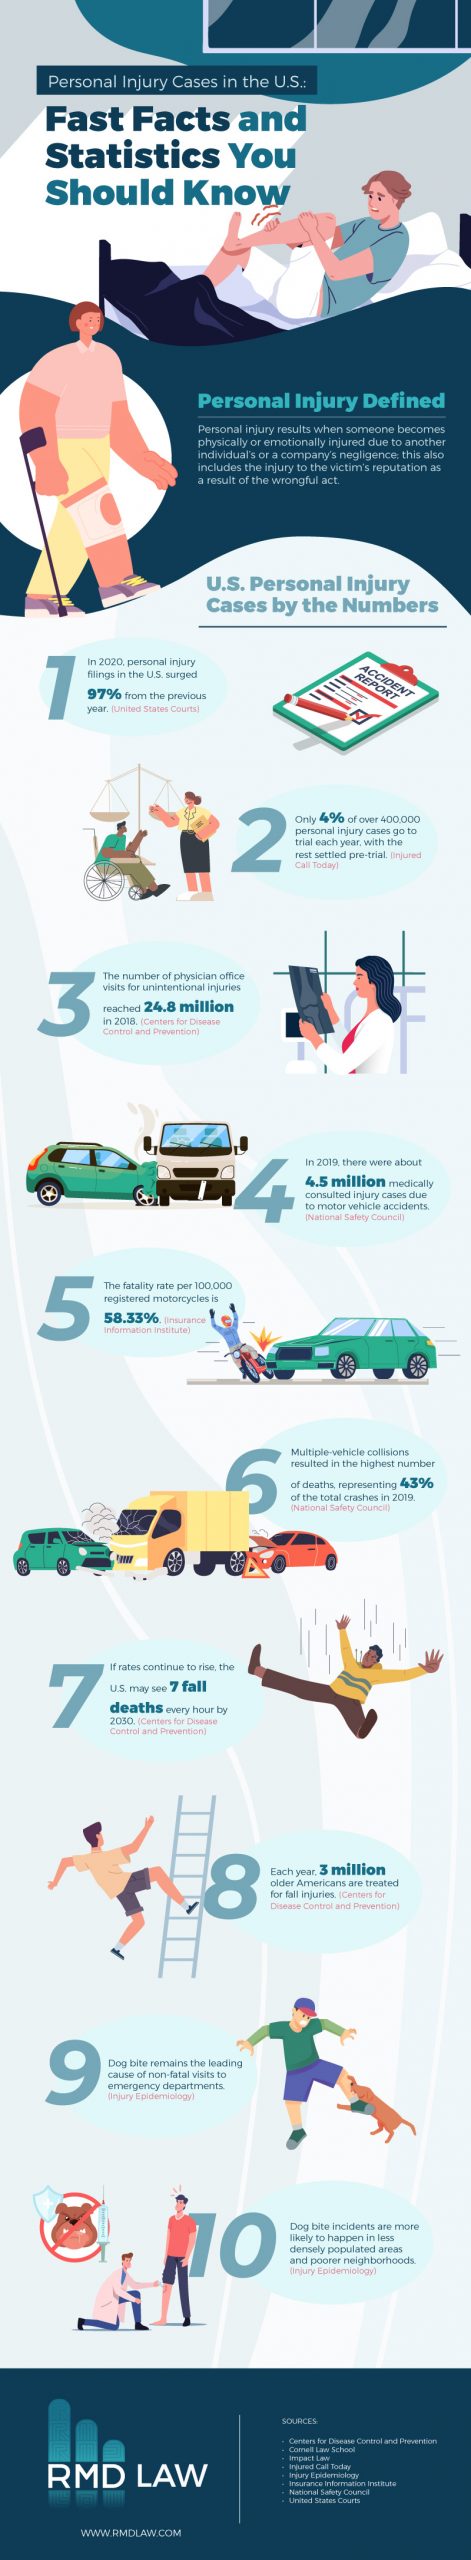 RMD Law Personal Injury Infographic JANUARY Scaled, Industry Today